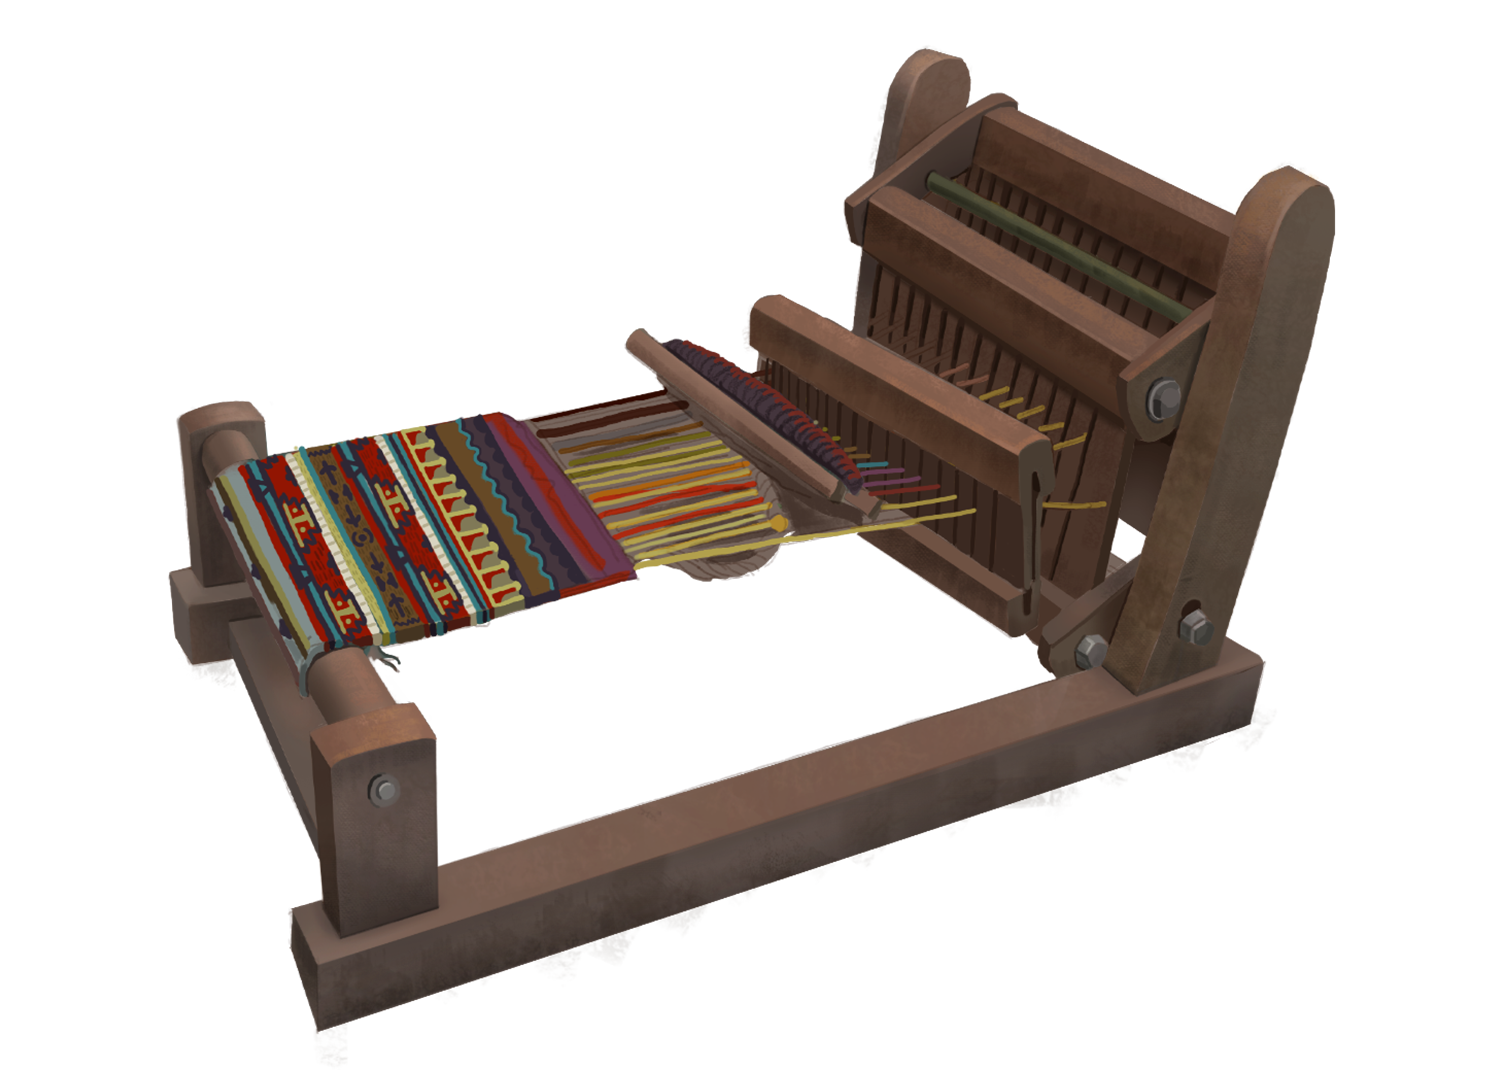 A wooden loom holds a partly-knitted colorful blanket in its arms, the strings from the blanket still pulled tight.